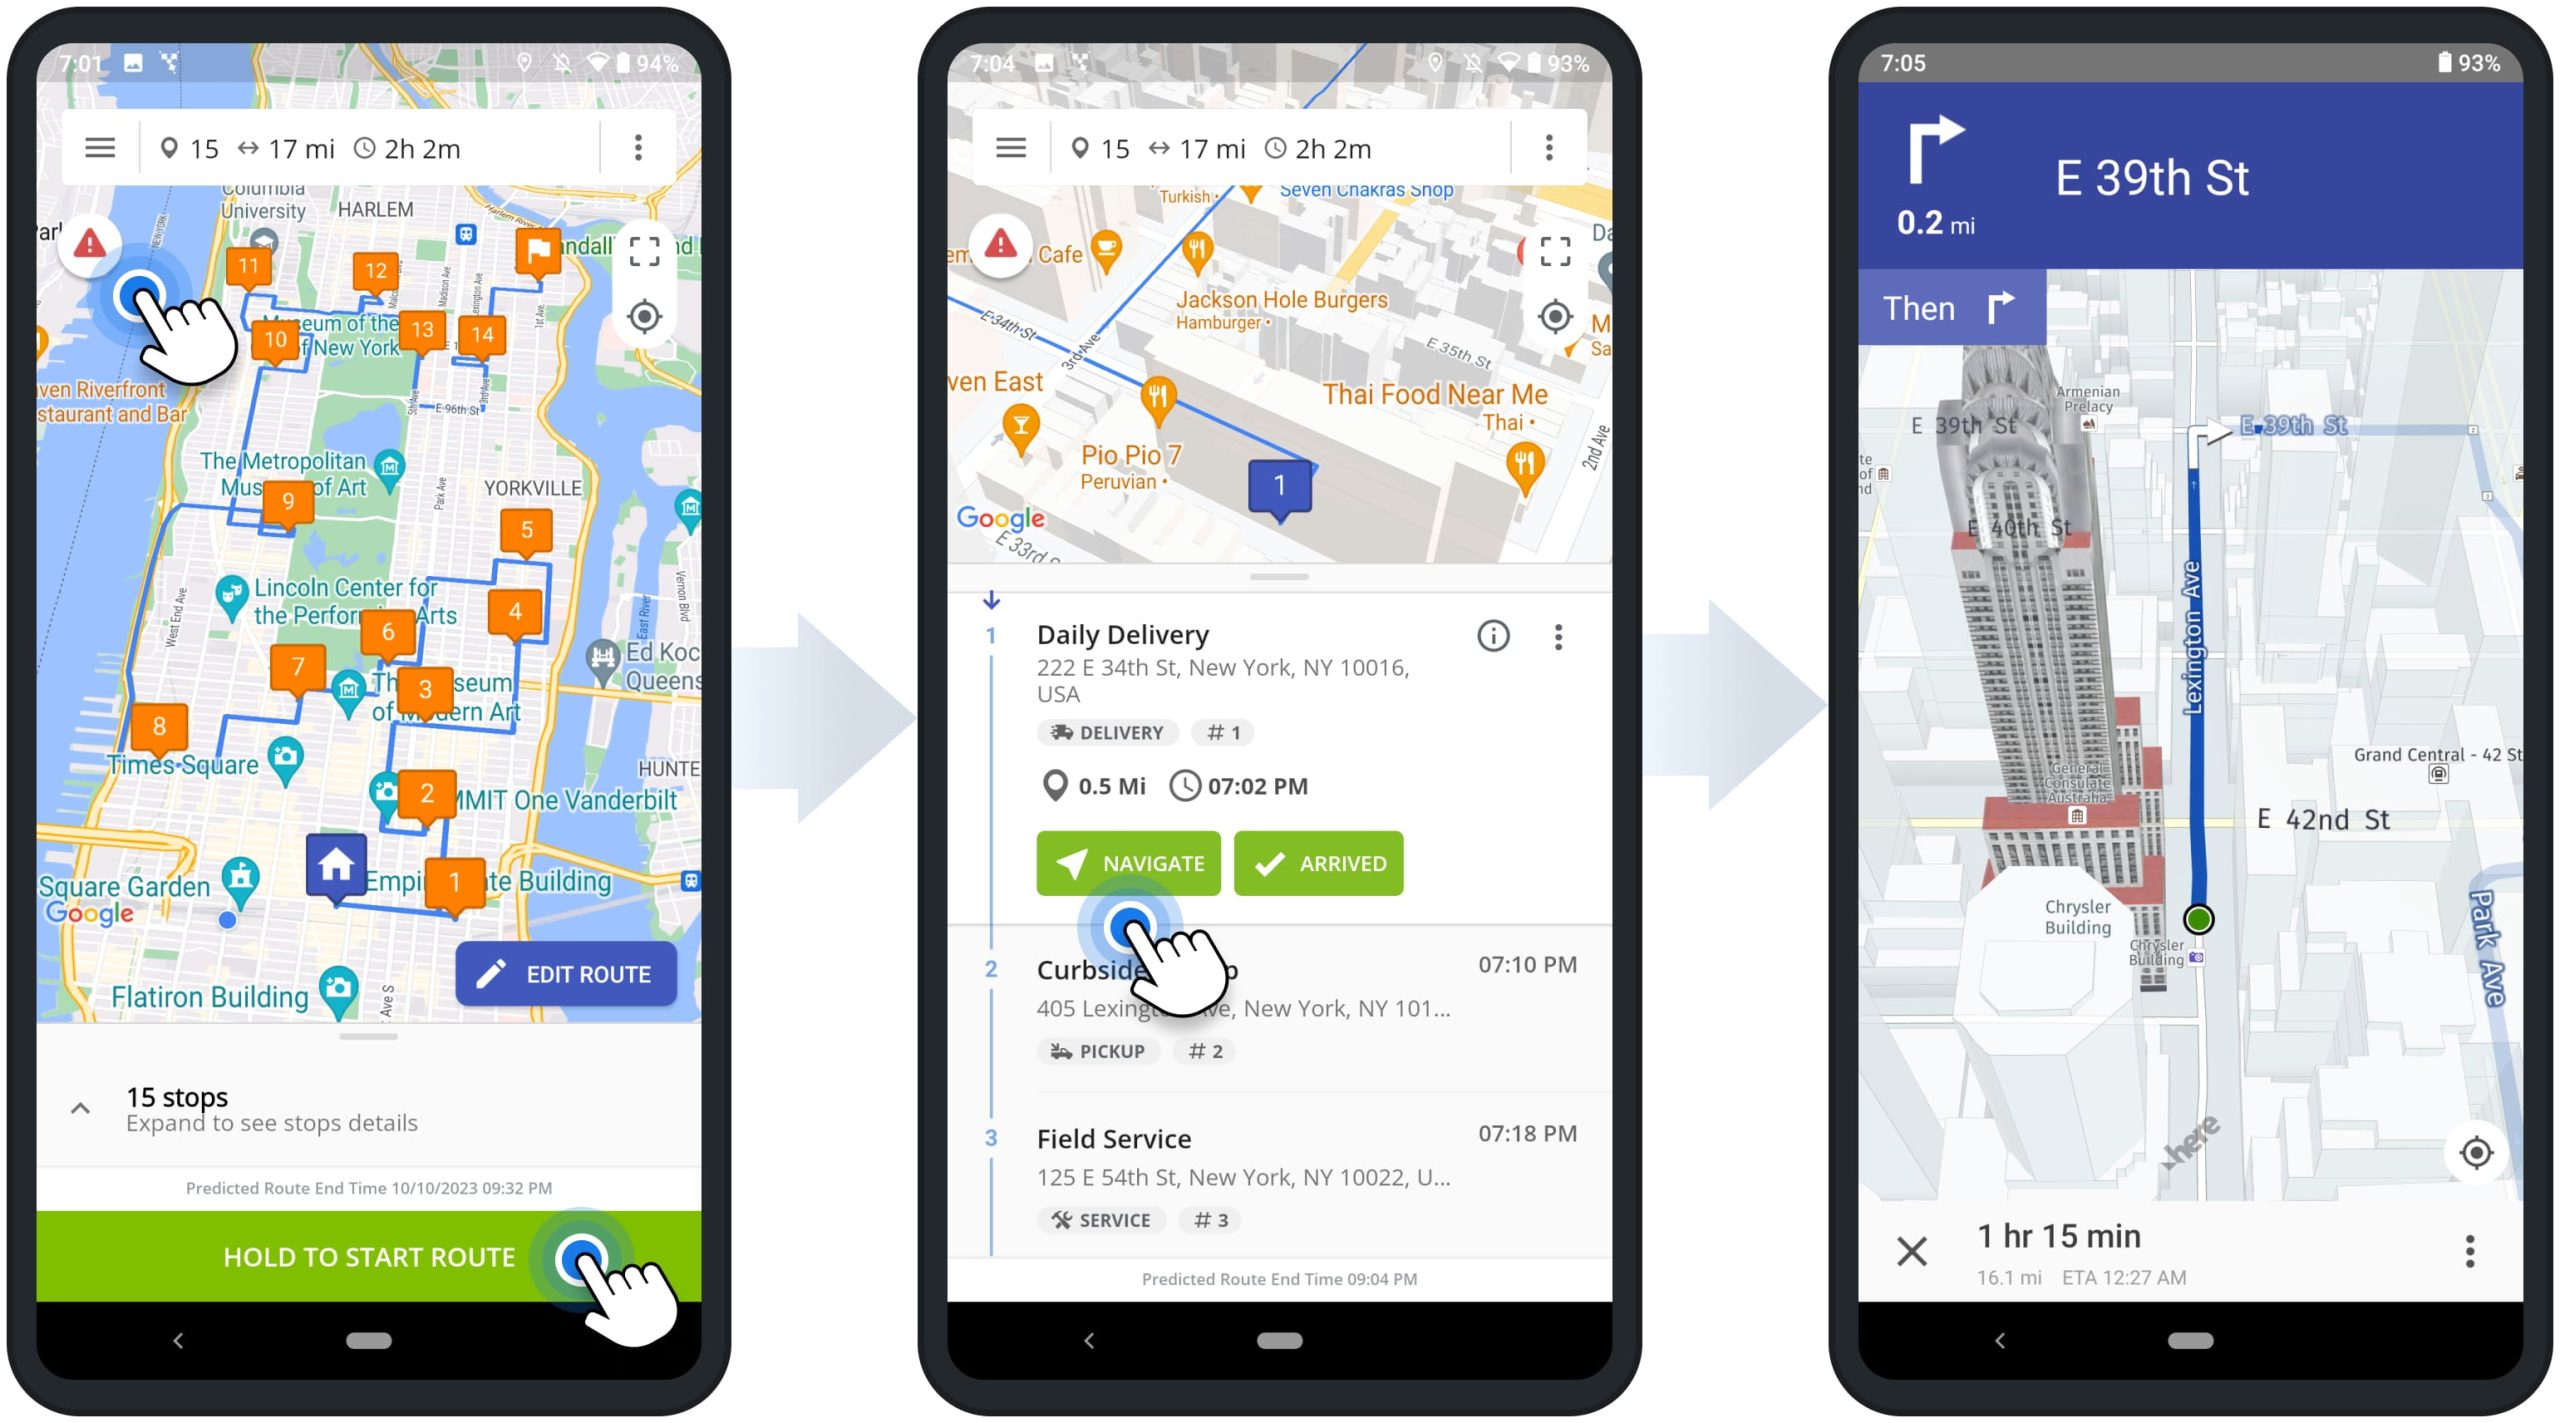 Use offline navigation and navigate multi-address routes offline on Route4Me's Mobile Android Route Planner app.